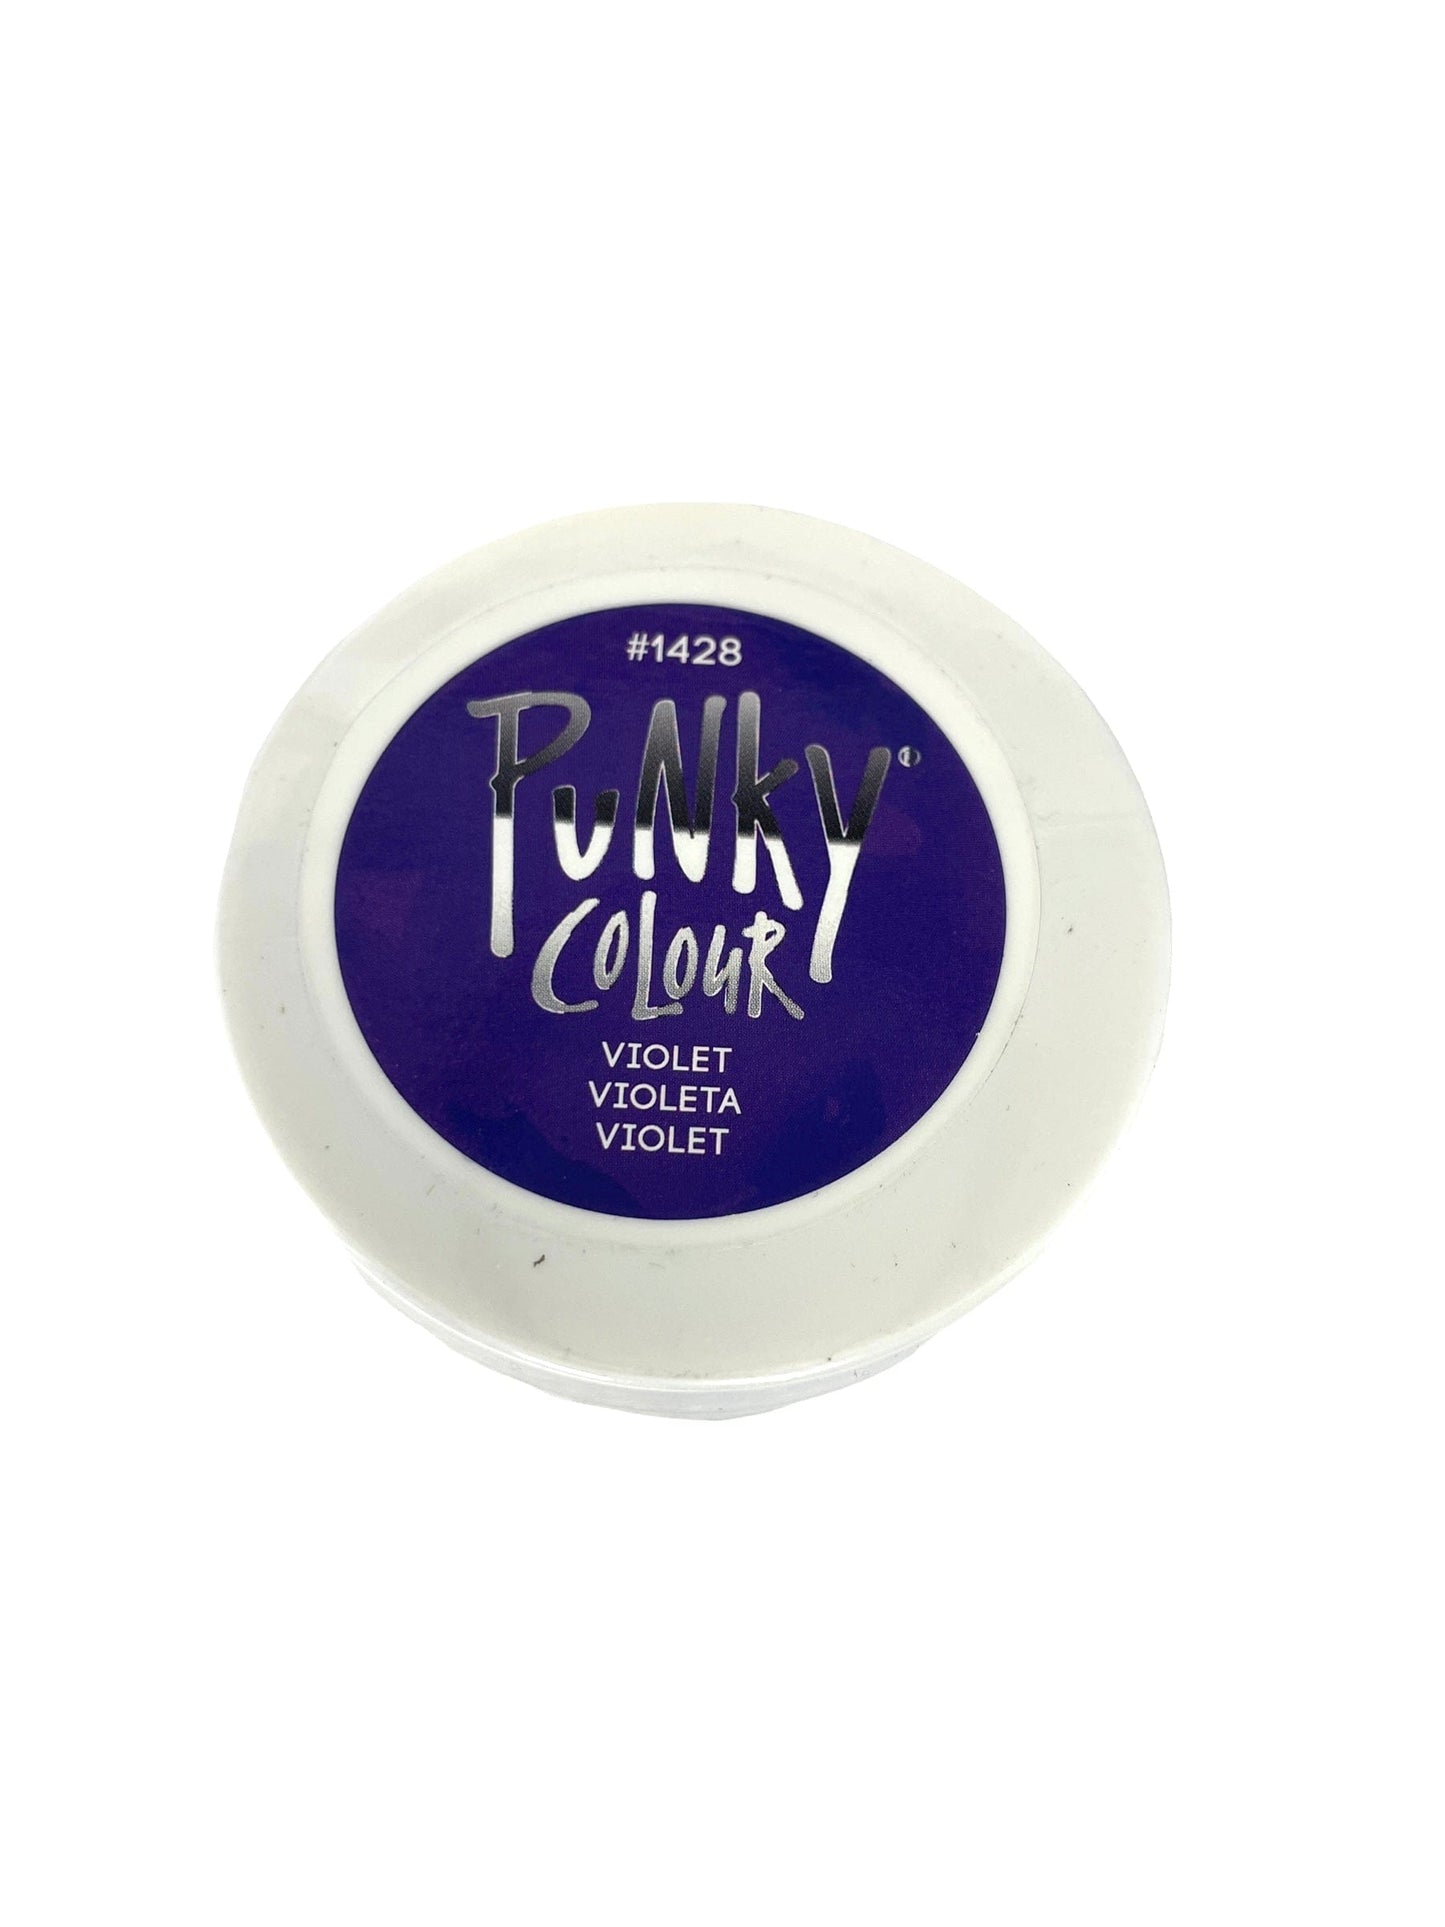 Violet Punky Color Conditioning Hair Color 3.5oz/100ml Semi Permanent